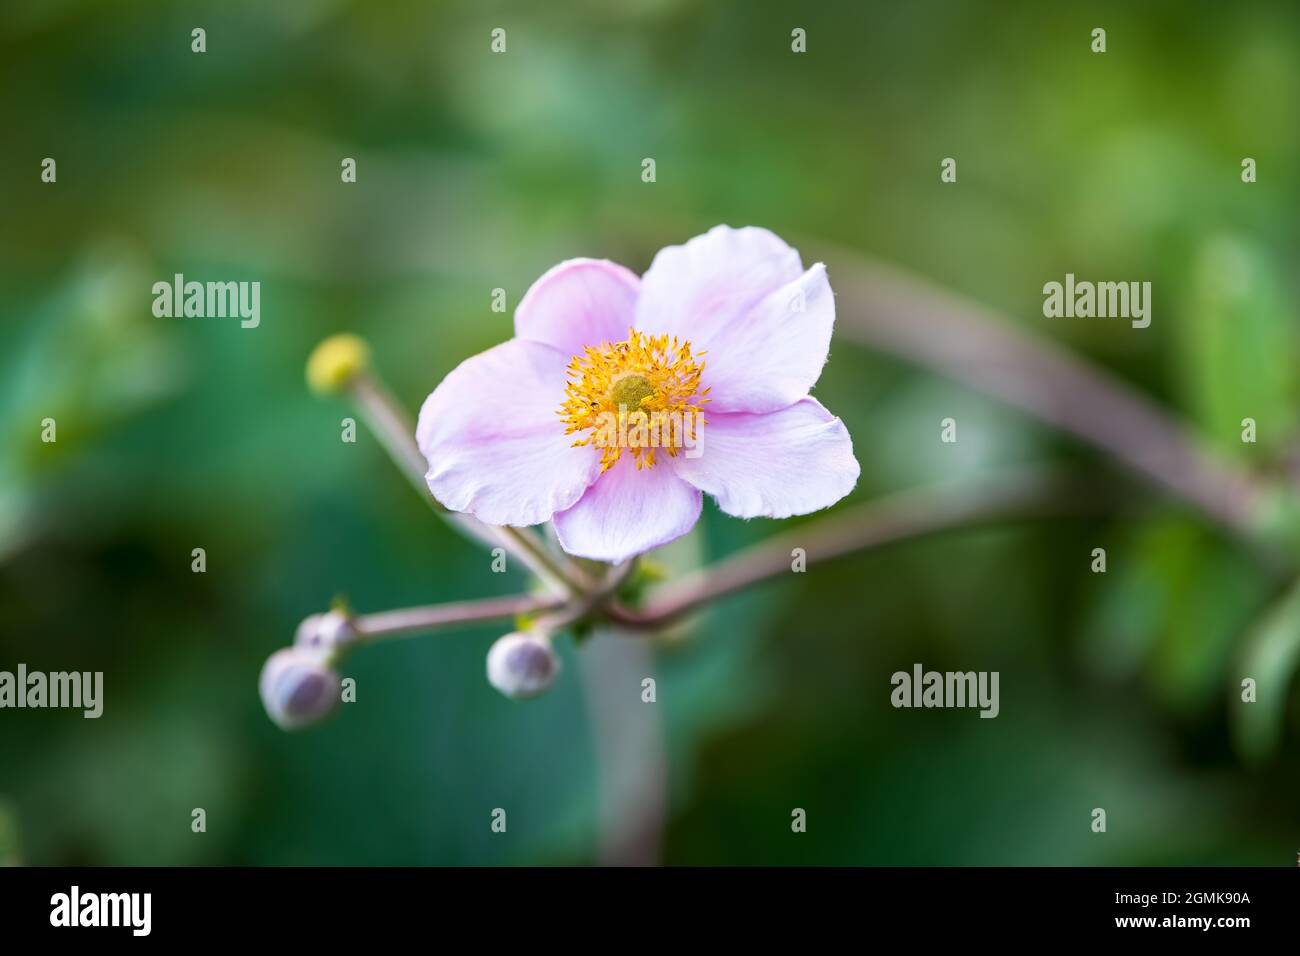 Pink flower with yellow centre Stock Photo